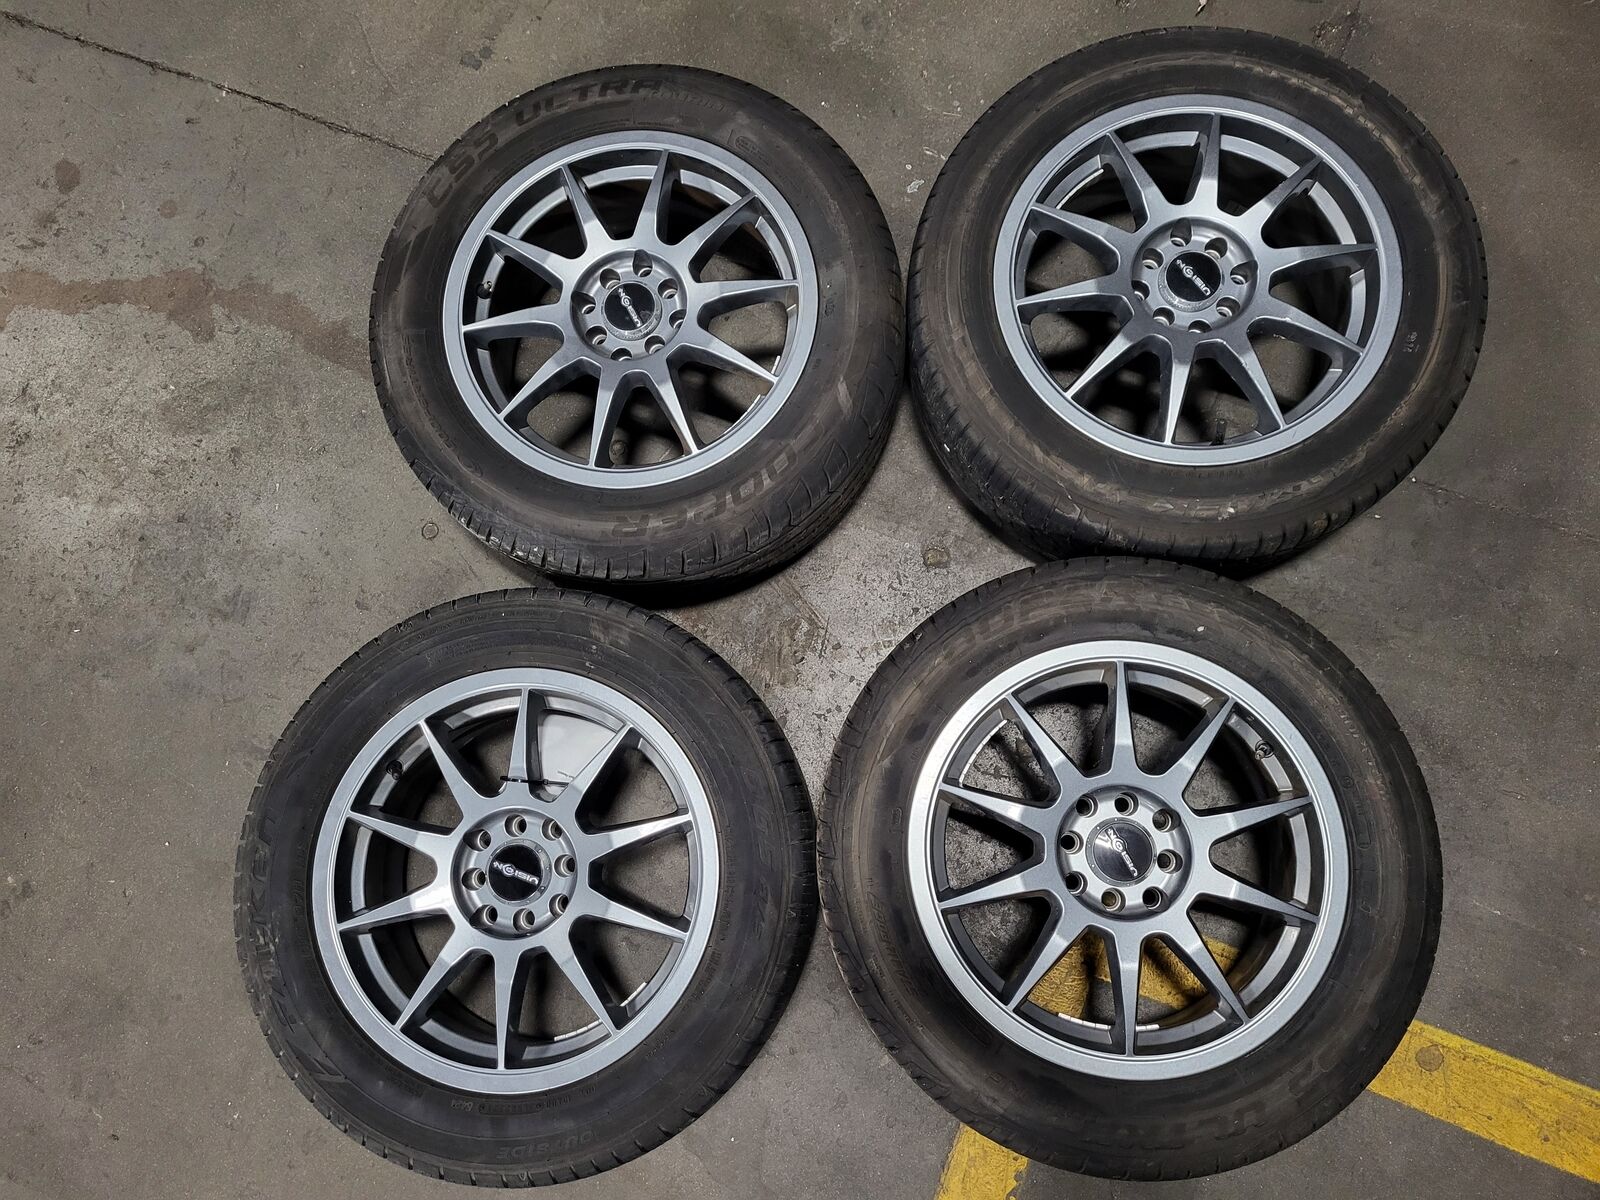 Aftermarket Set Of 4 Wheels w/Tires 16in Off Of 2011 Nissan Sentra LKQ